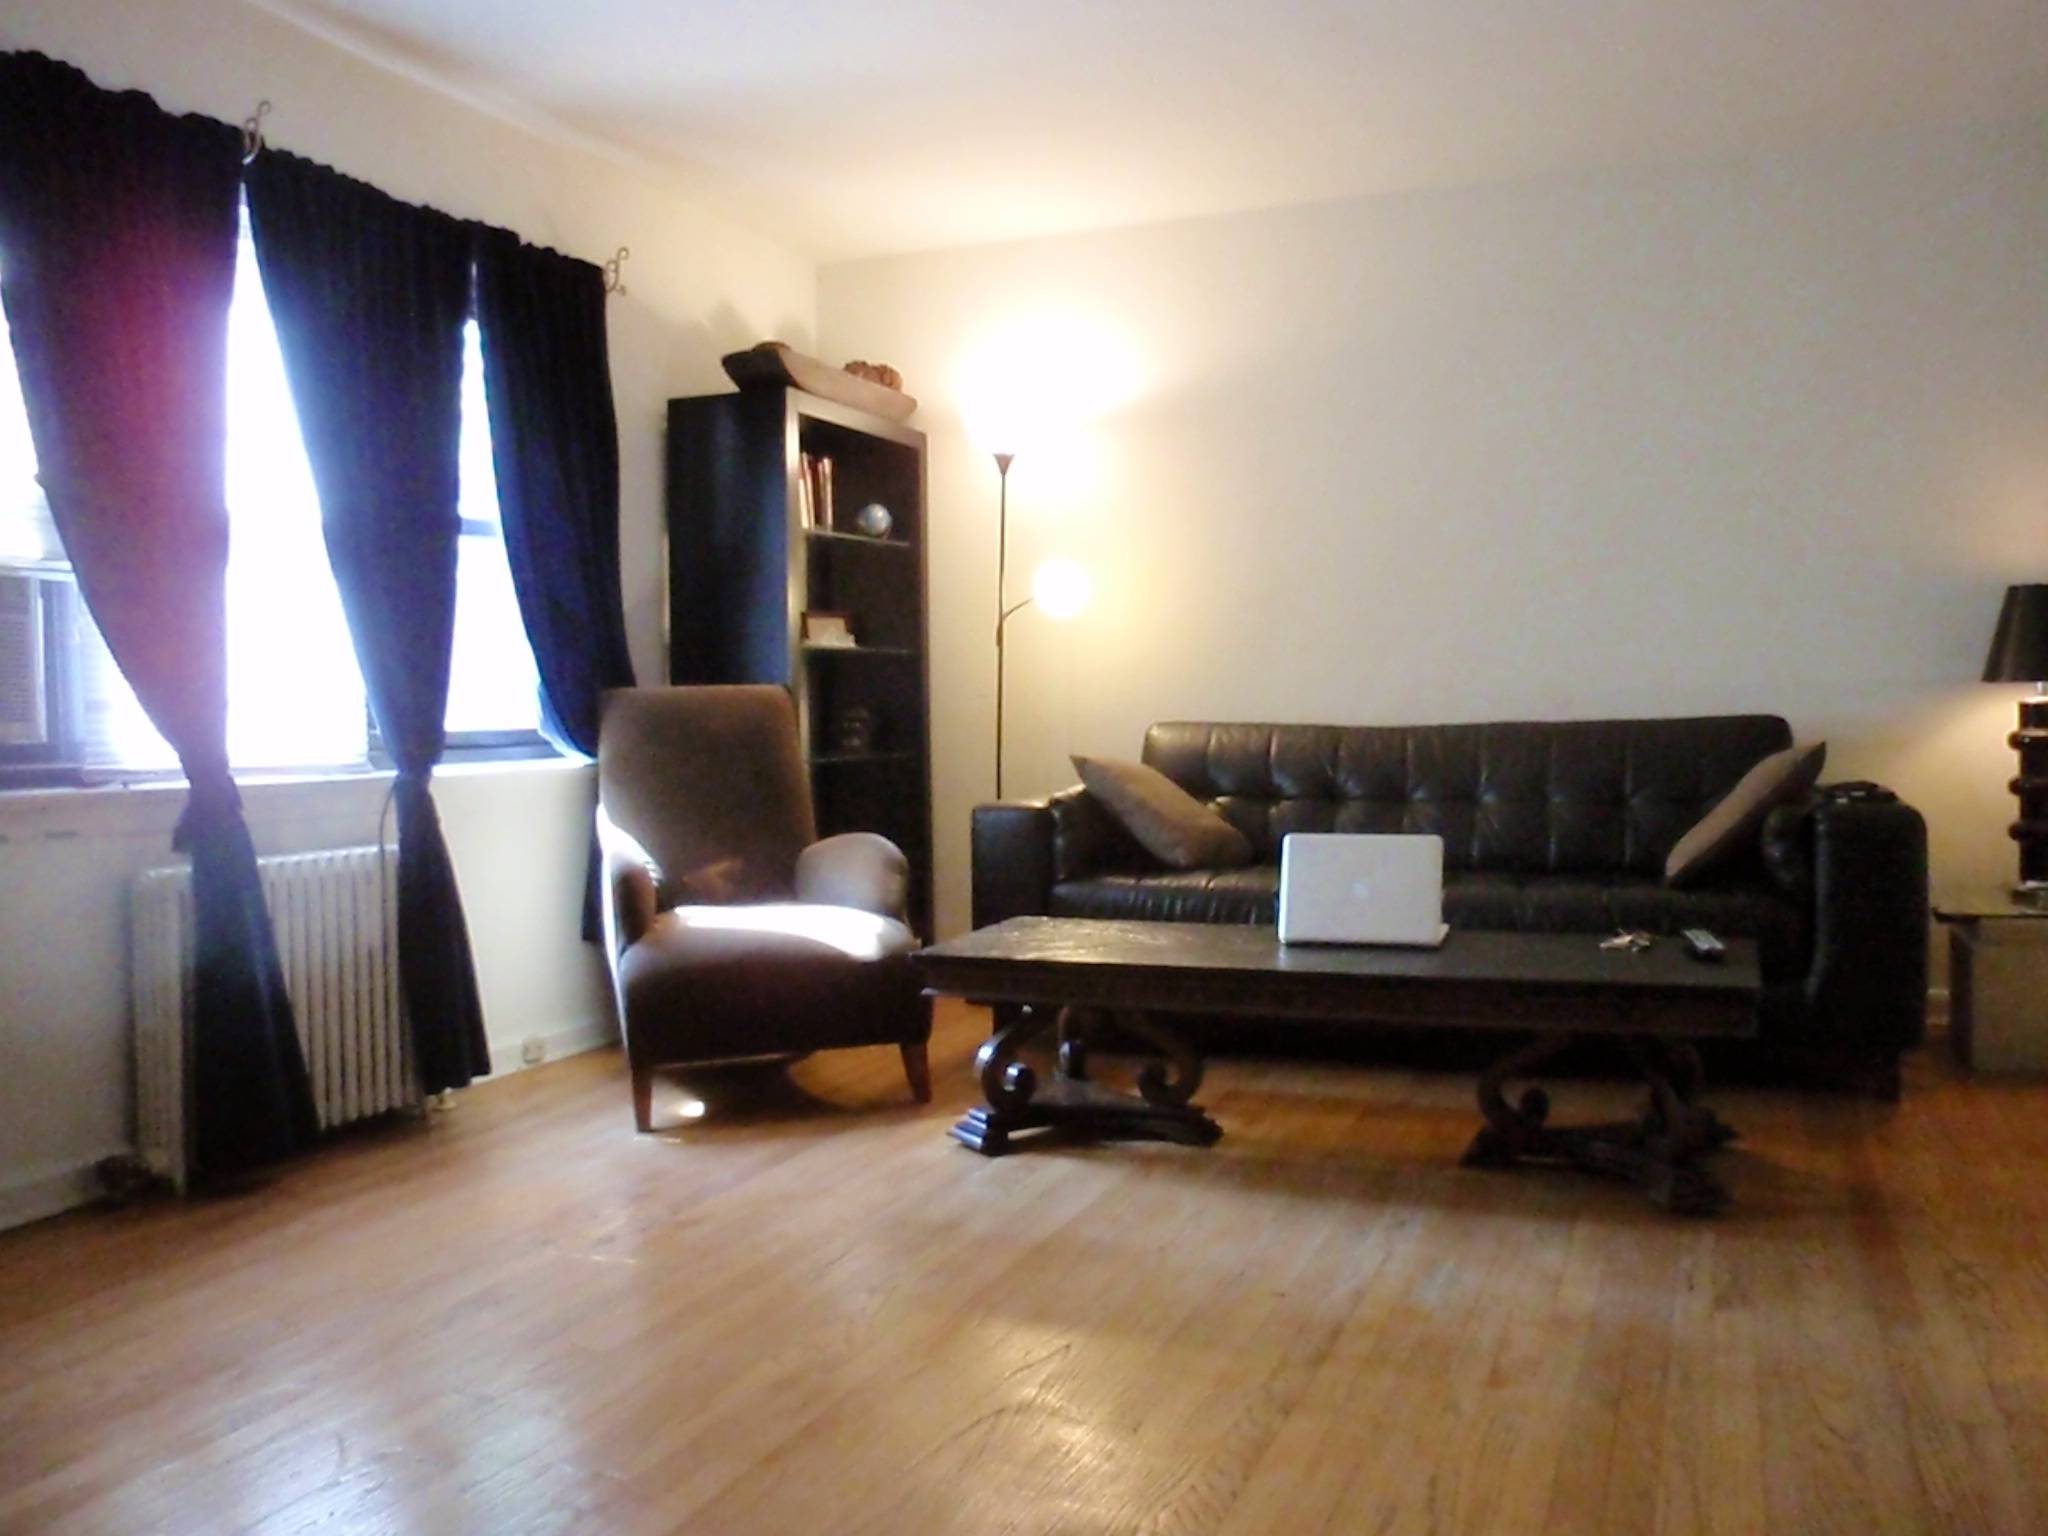  $1900 / 600 S.F #Furnished Studio *Utilities / Cable & Internet Included #NoFee NoBrokerFee #FortLee #NJ #07024 5 Mins to #NYC